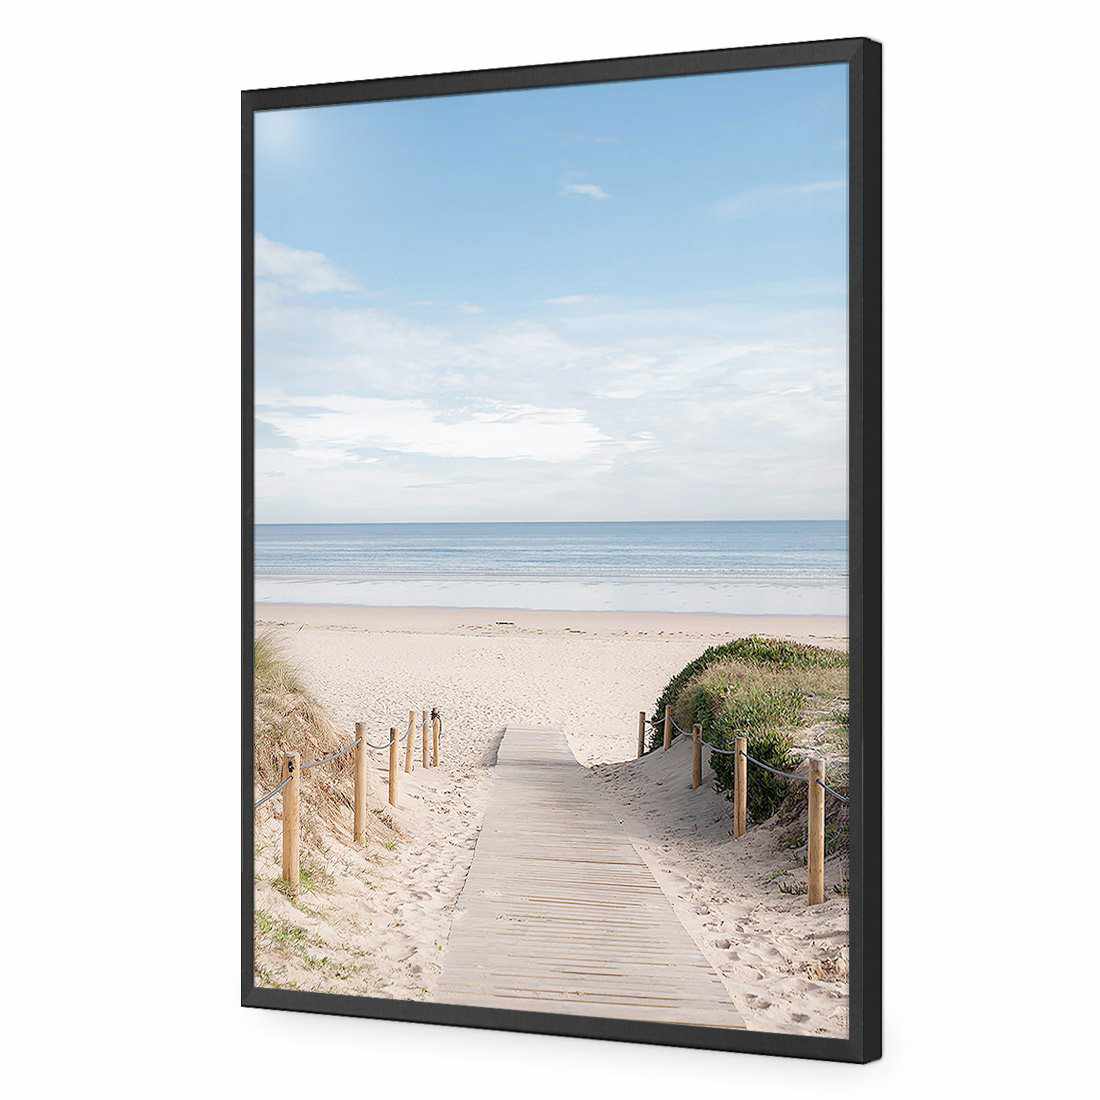 Pathway To The Sea-Acrylic-Wall Art Design-Without Border-Acrylic - Black Frame-45x30cm-Wall Art Designs